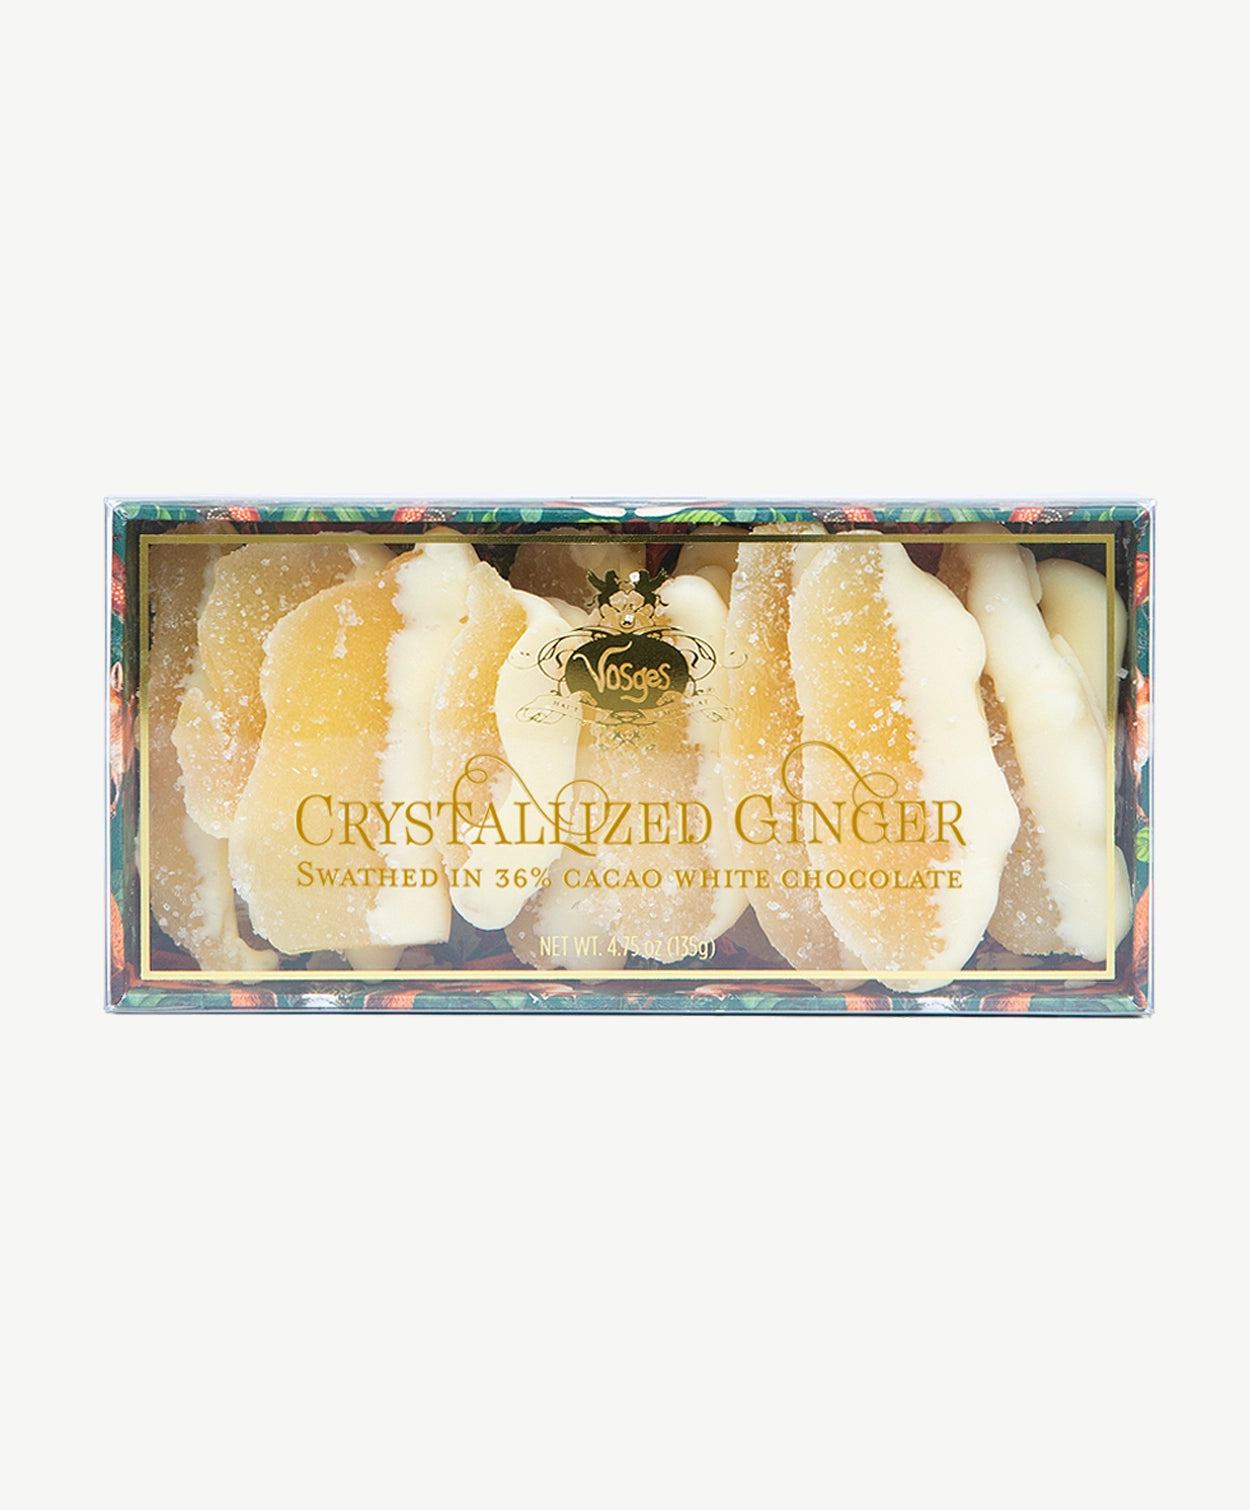 A close up view of Vosges white chocolate dipped Crystalized Ginger in a transparent box adorned with gold text on a light grey background.